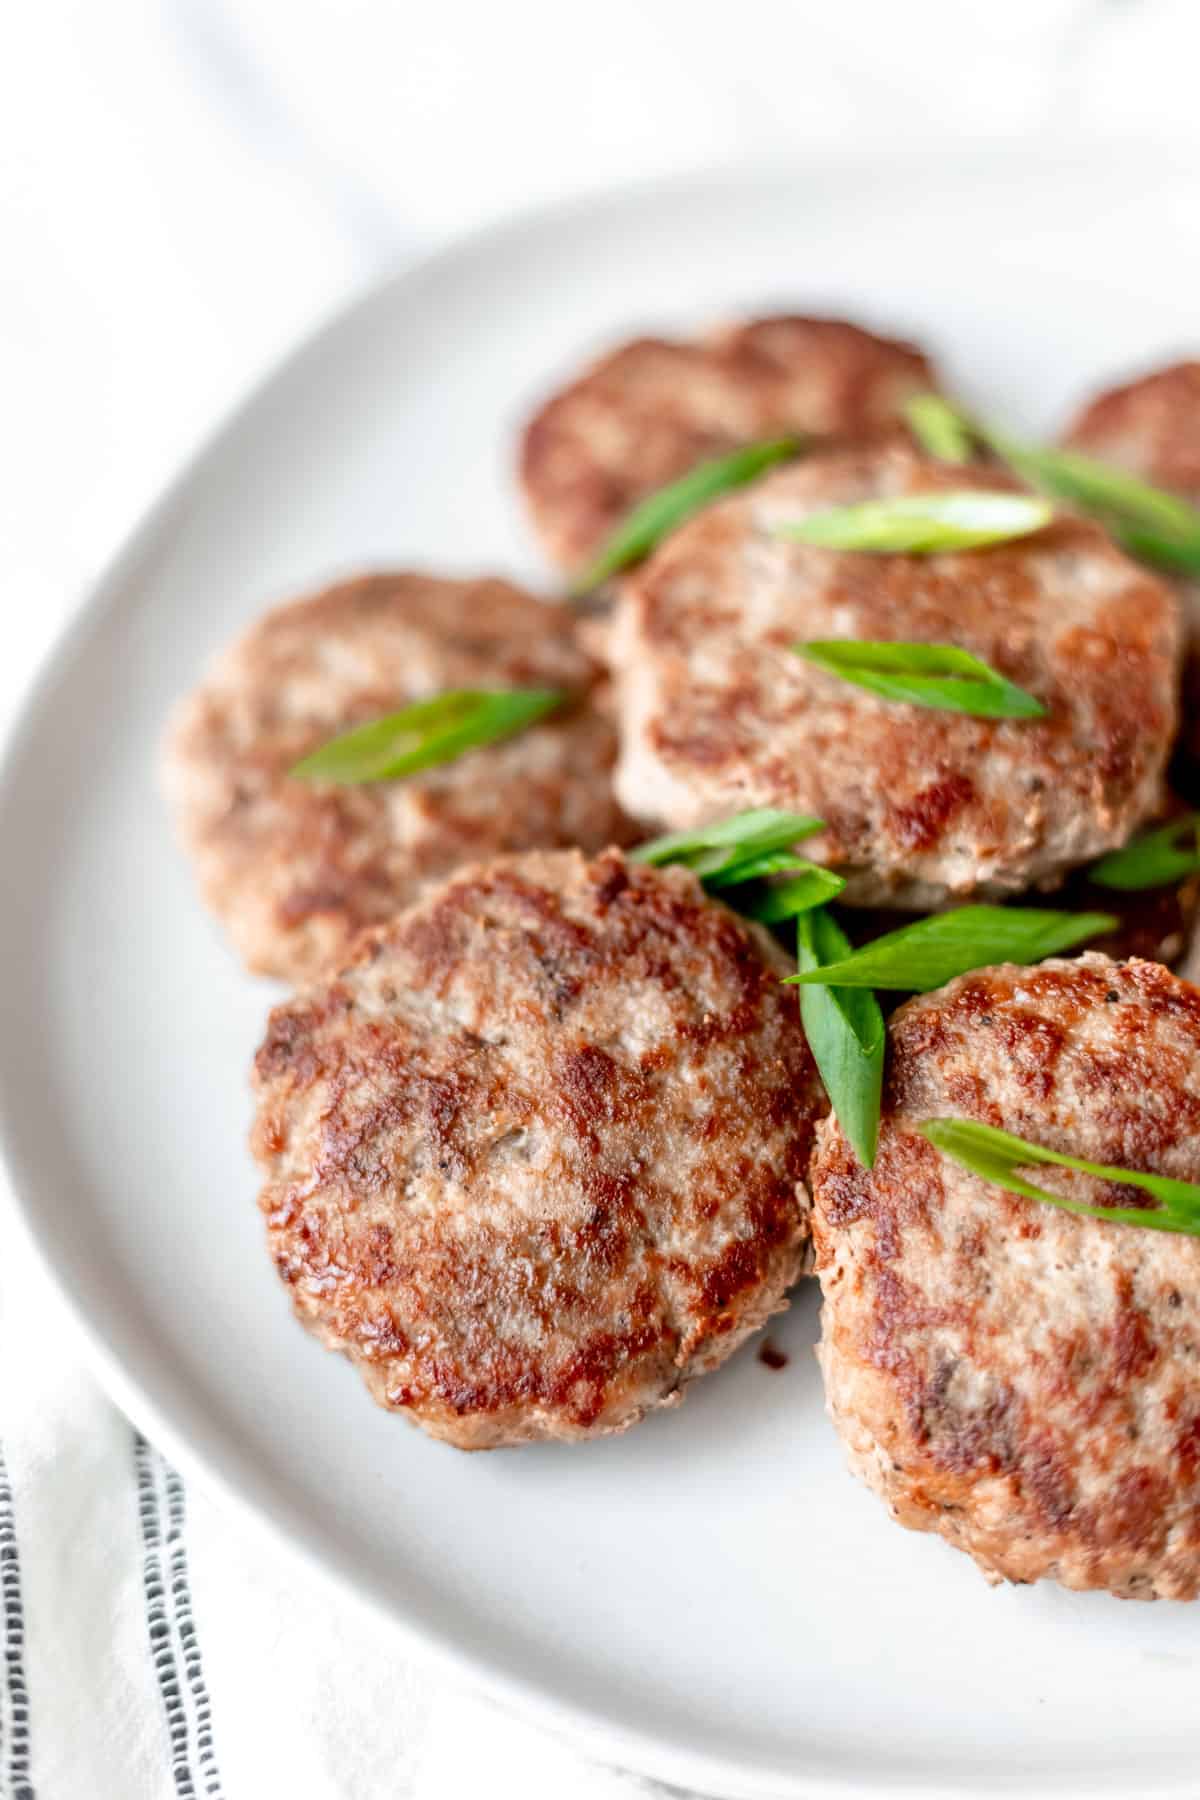 Overhead of turkey sausage patties stacked on top of each other and garnished with sliced green onions on a white plate.